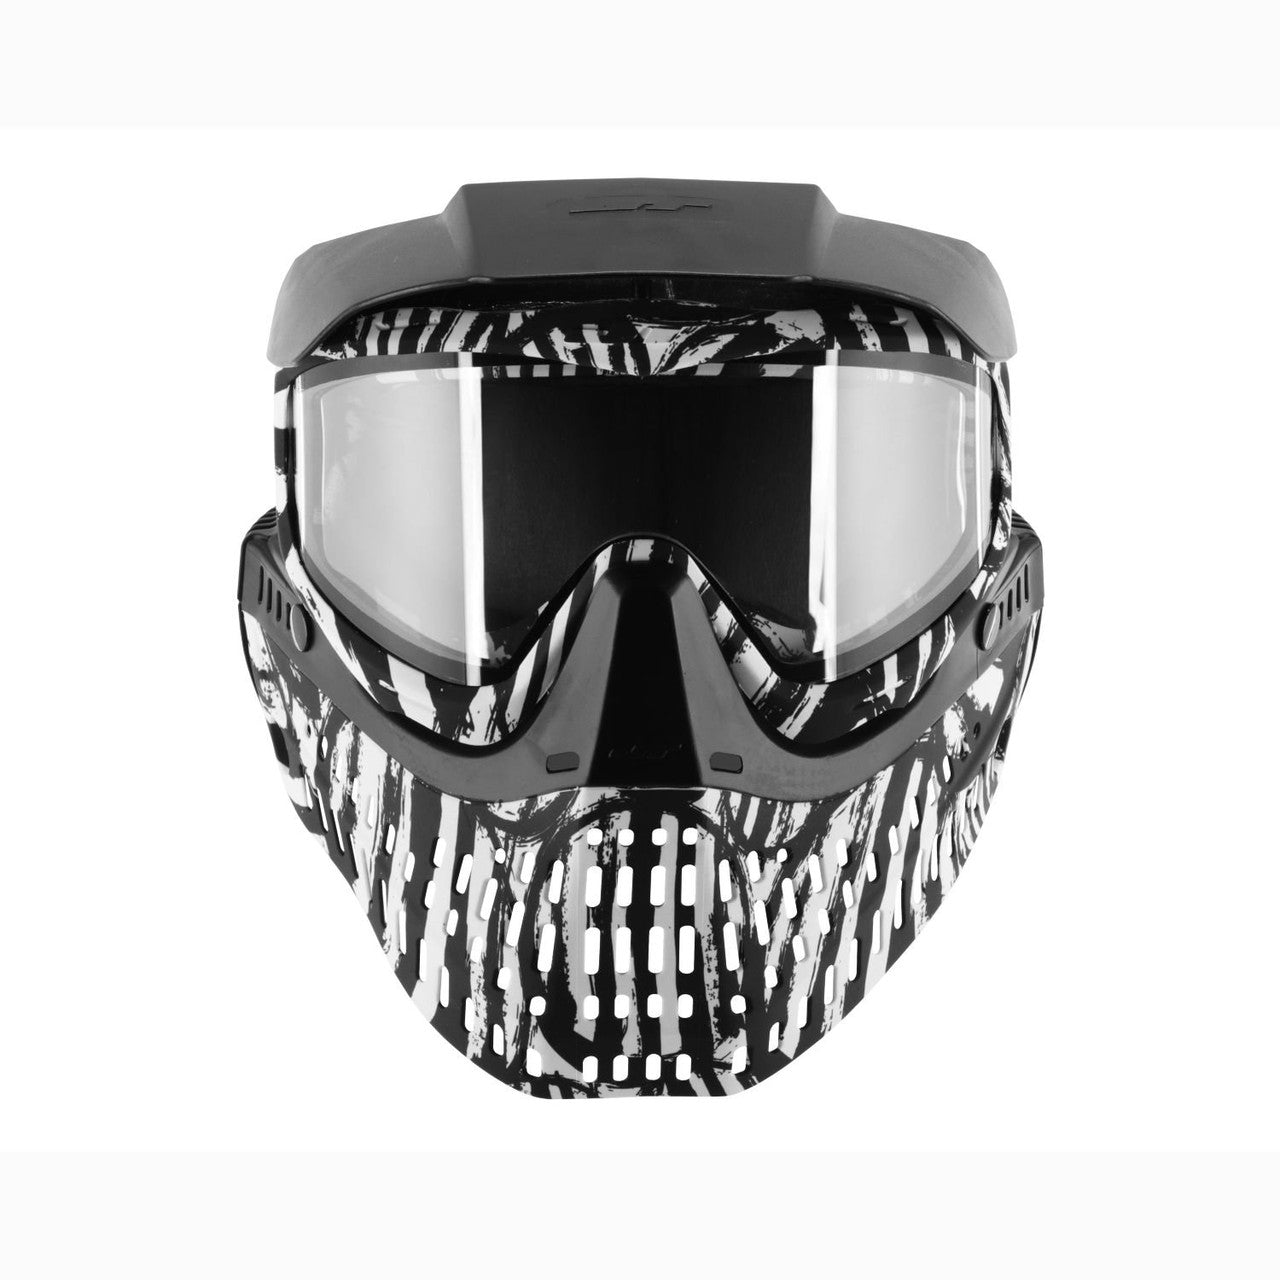 JT Paintball - JT Spectra Pro-Shield Paintball Goggle System, the